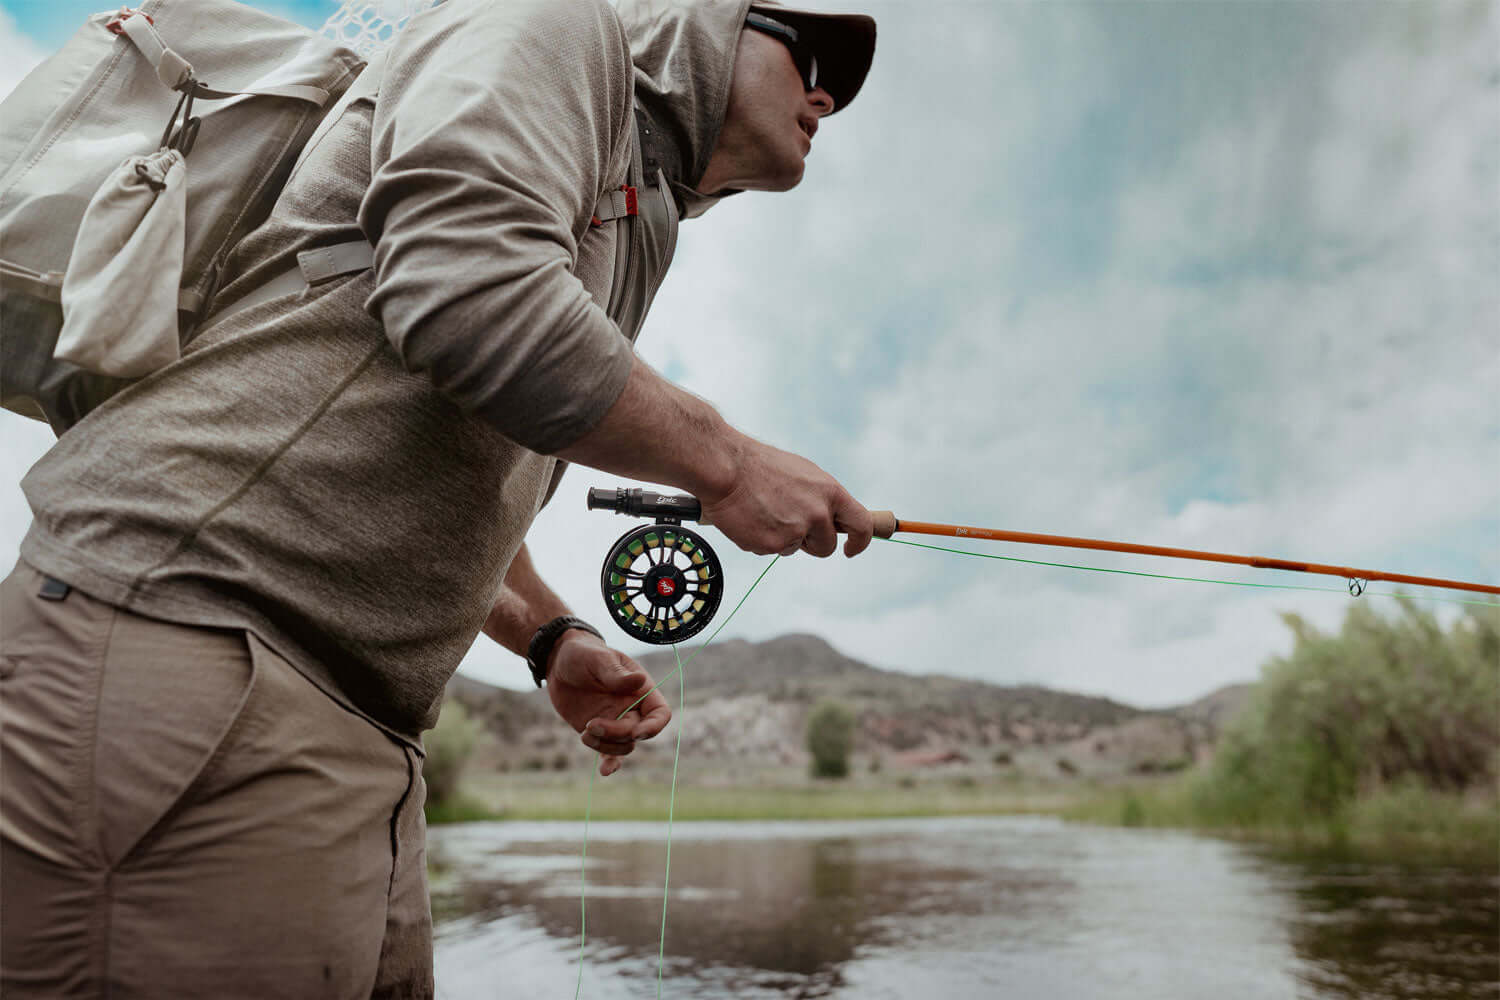 Epic Fly Rods - Premium Fly Fishing Gear - New Zealand